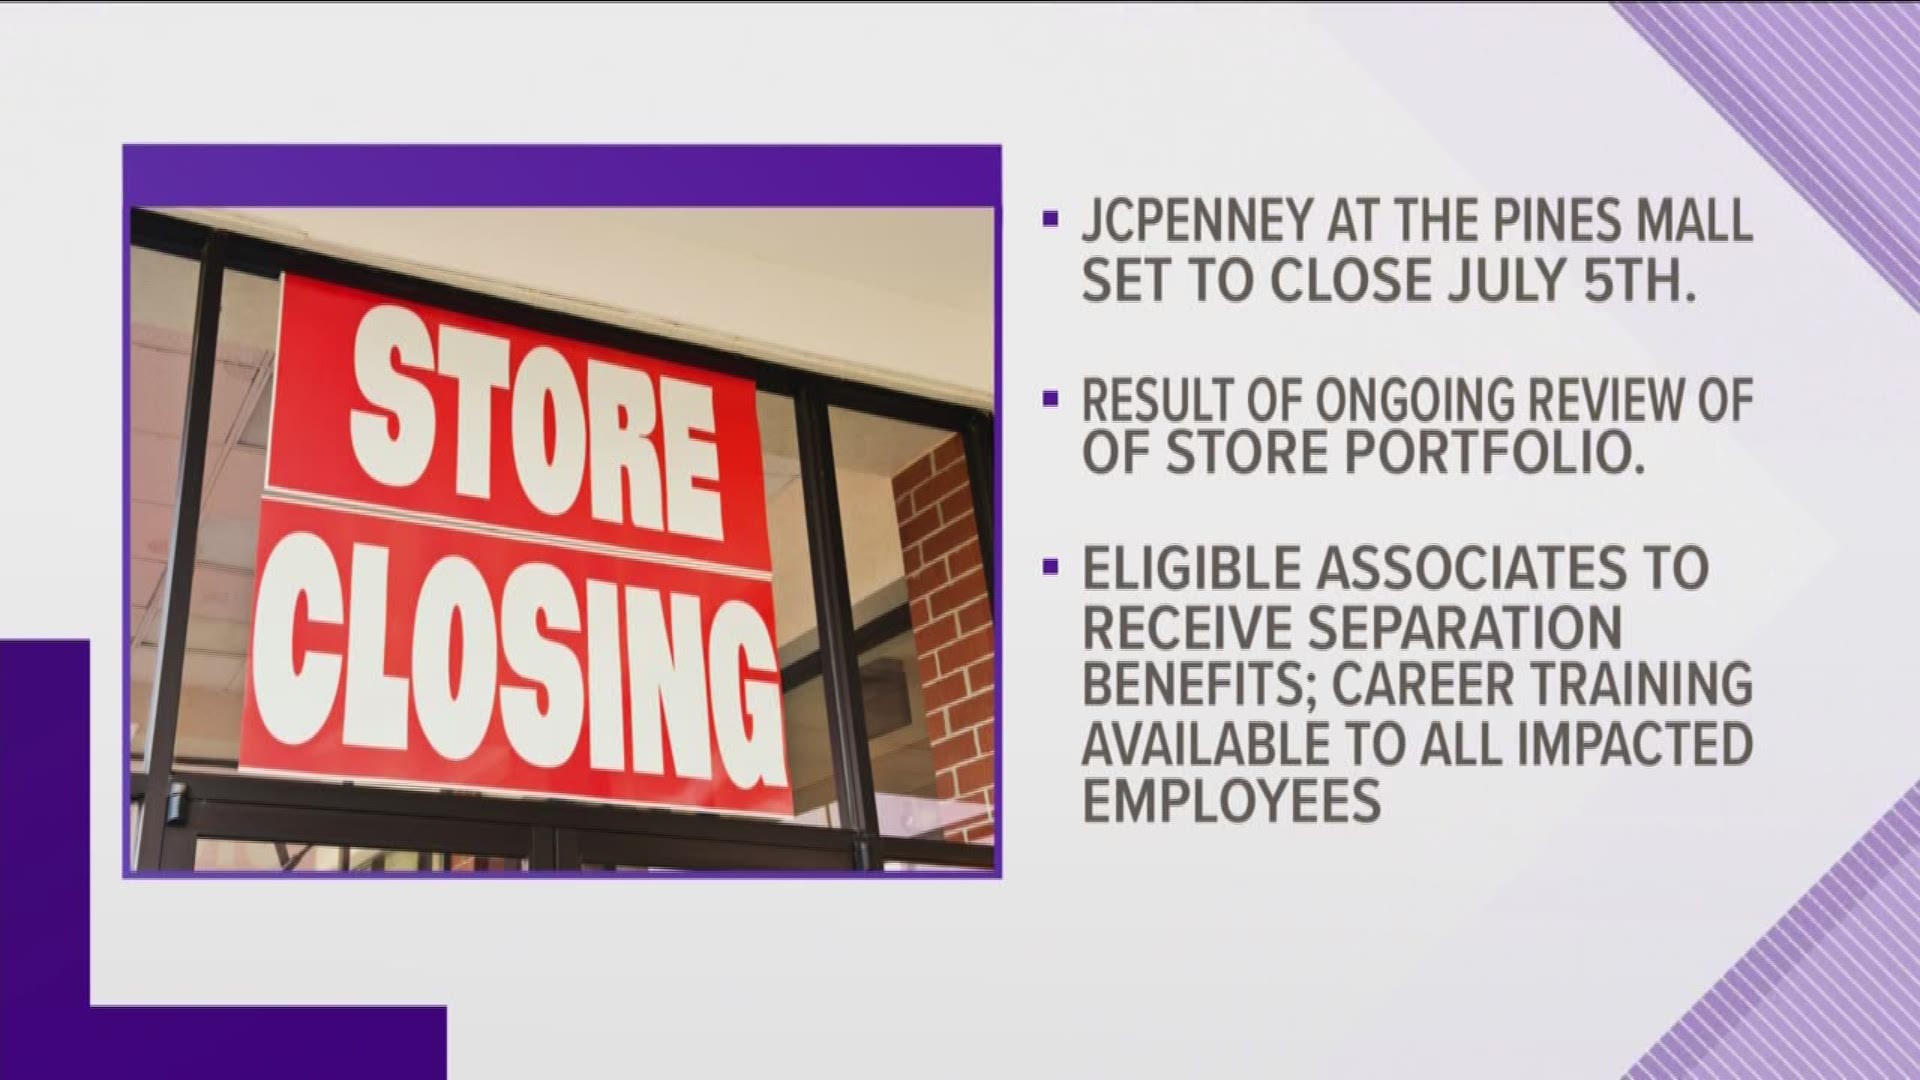 Sinking sales are causing JCPenney to close multiple store locations across the U.S., including one in the Pine Bluff "Pines Mall" - effective July 5th.